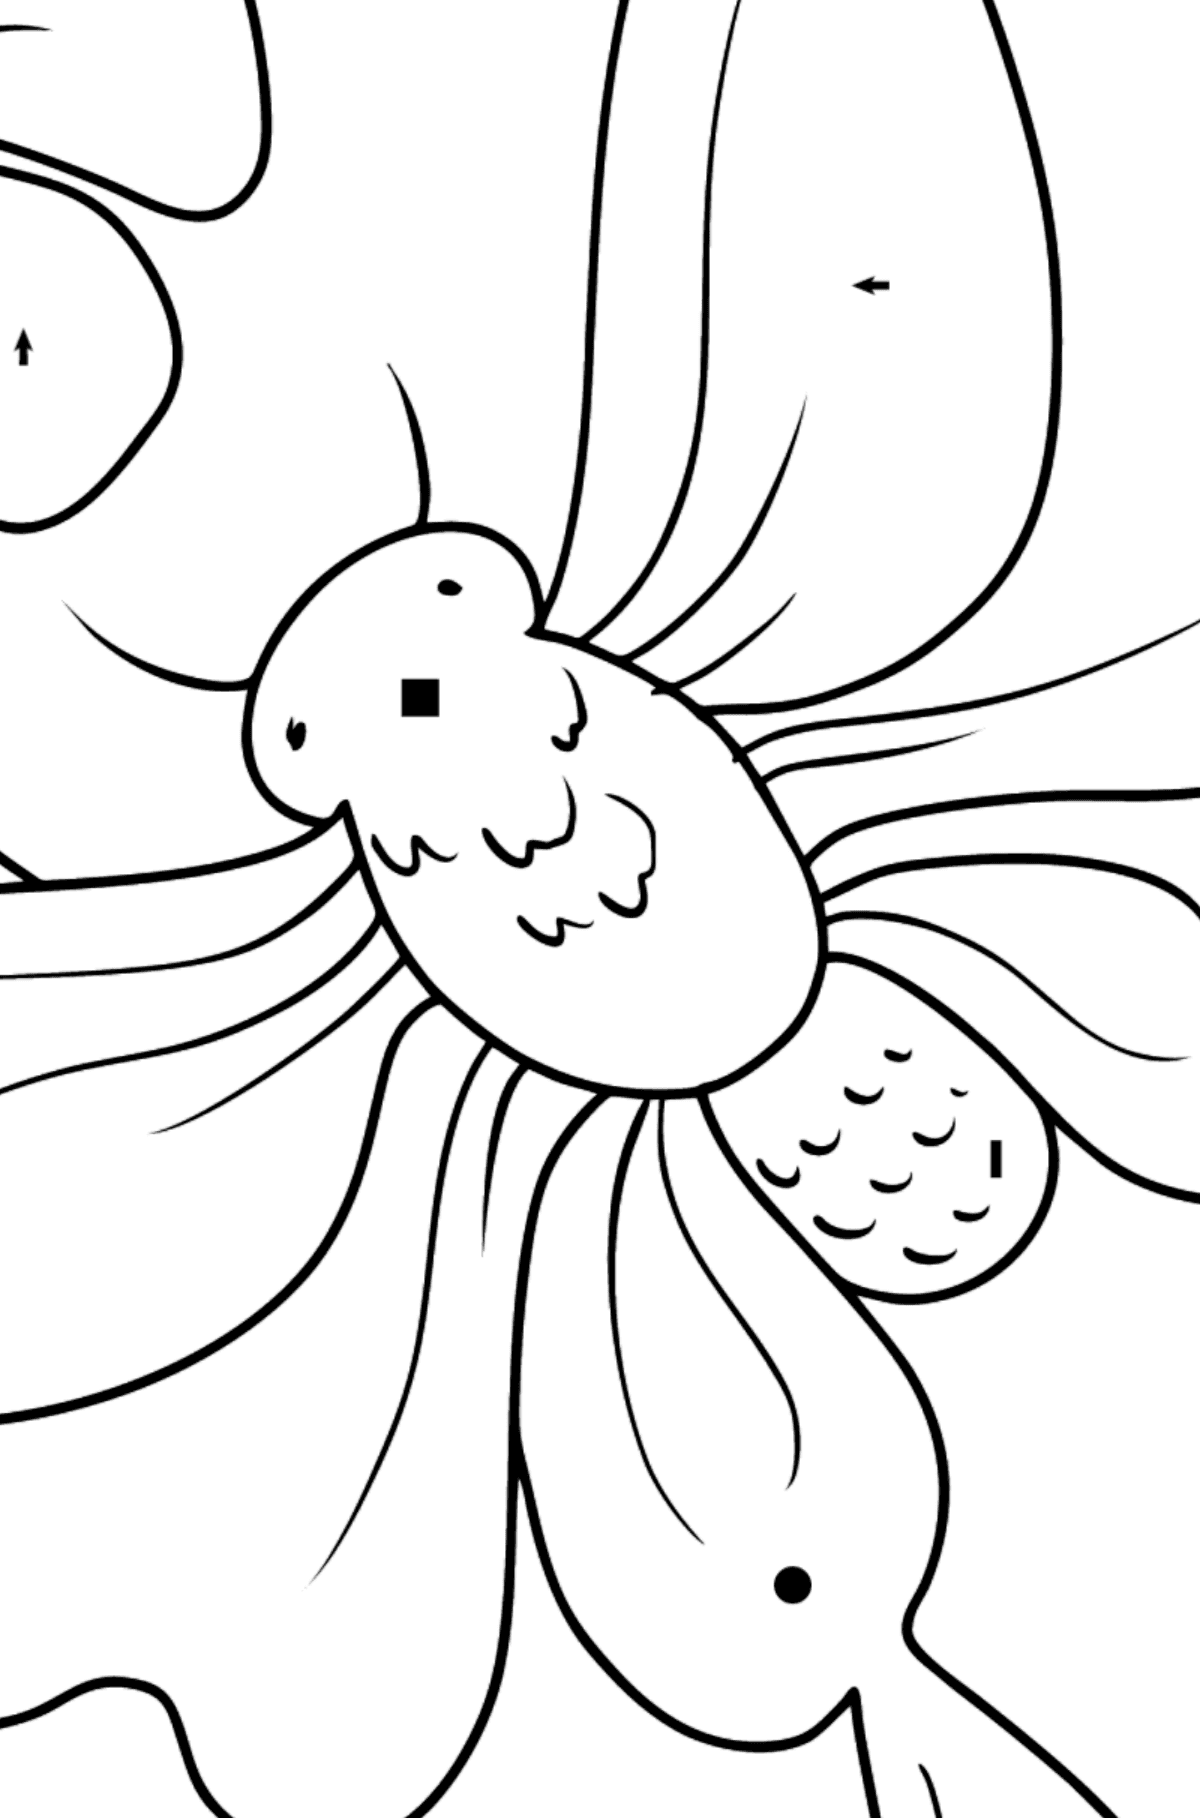 Butterfly on a Flower coloring page - Coloring by Symbols for Kids